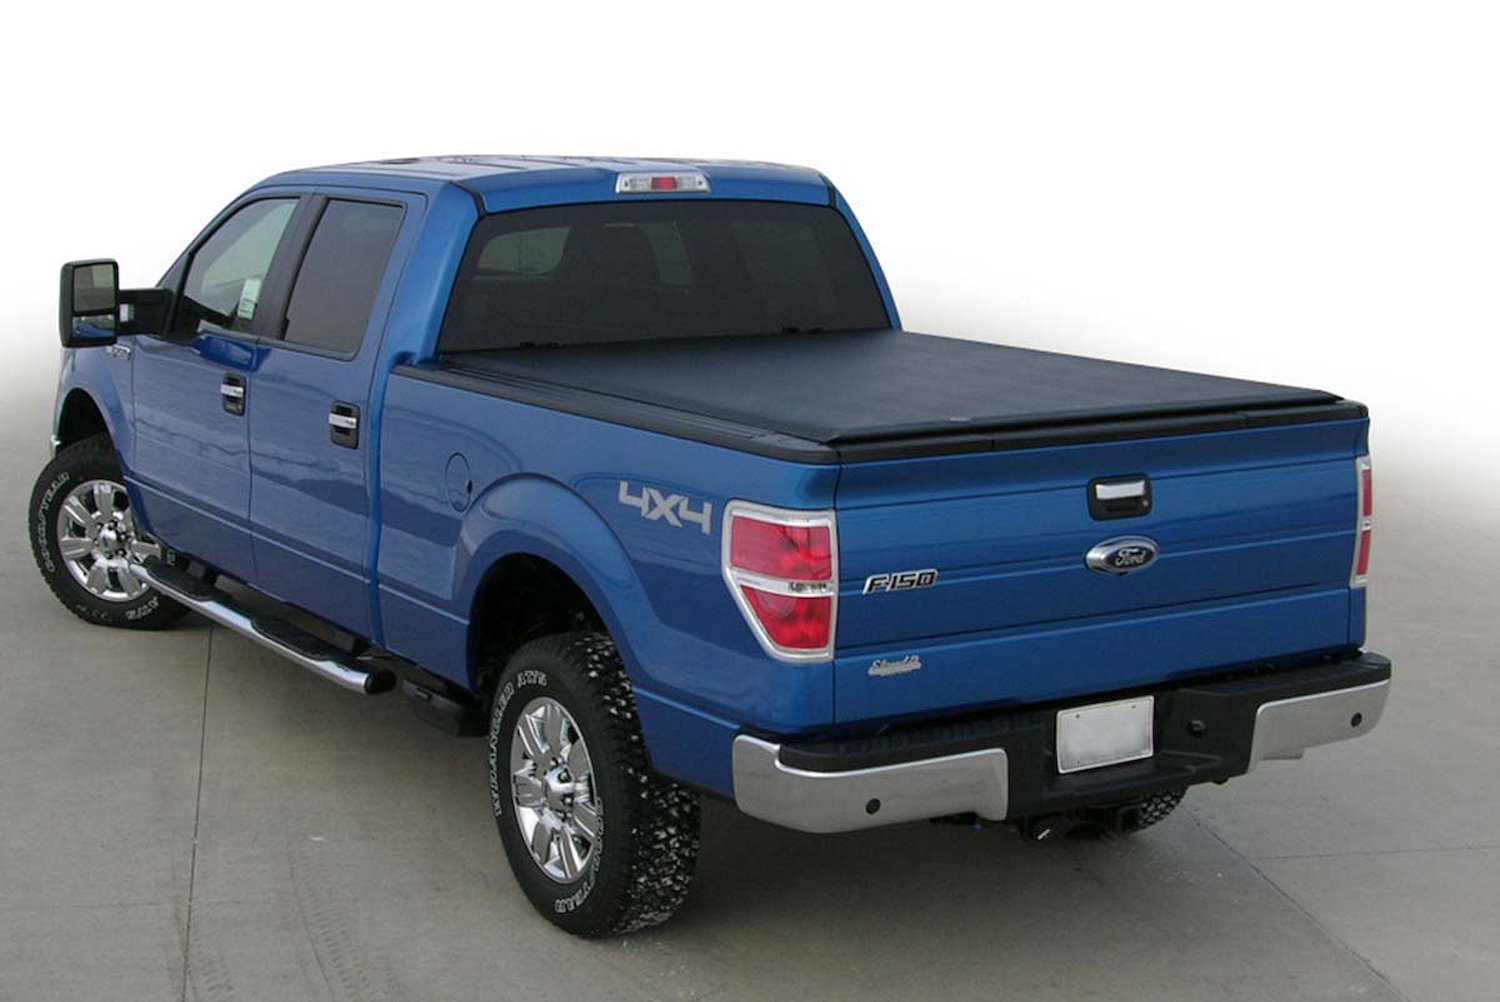 LORADO Roll-Up Tonneau Cover, Fits Select Toyota Tundra, with 5 ft. 6 in. Bed w/Deck Rail